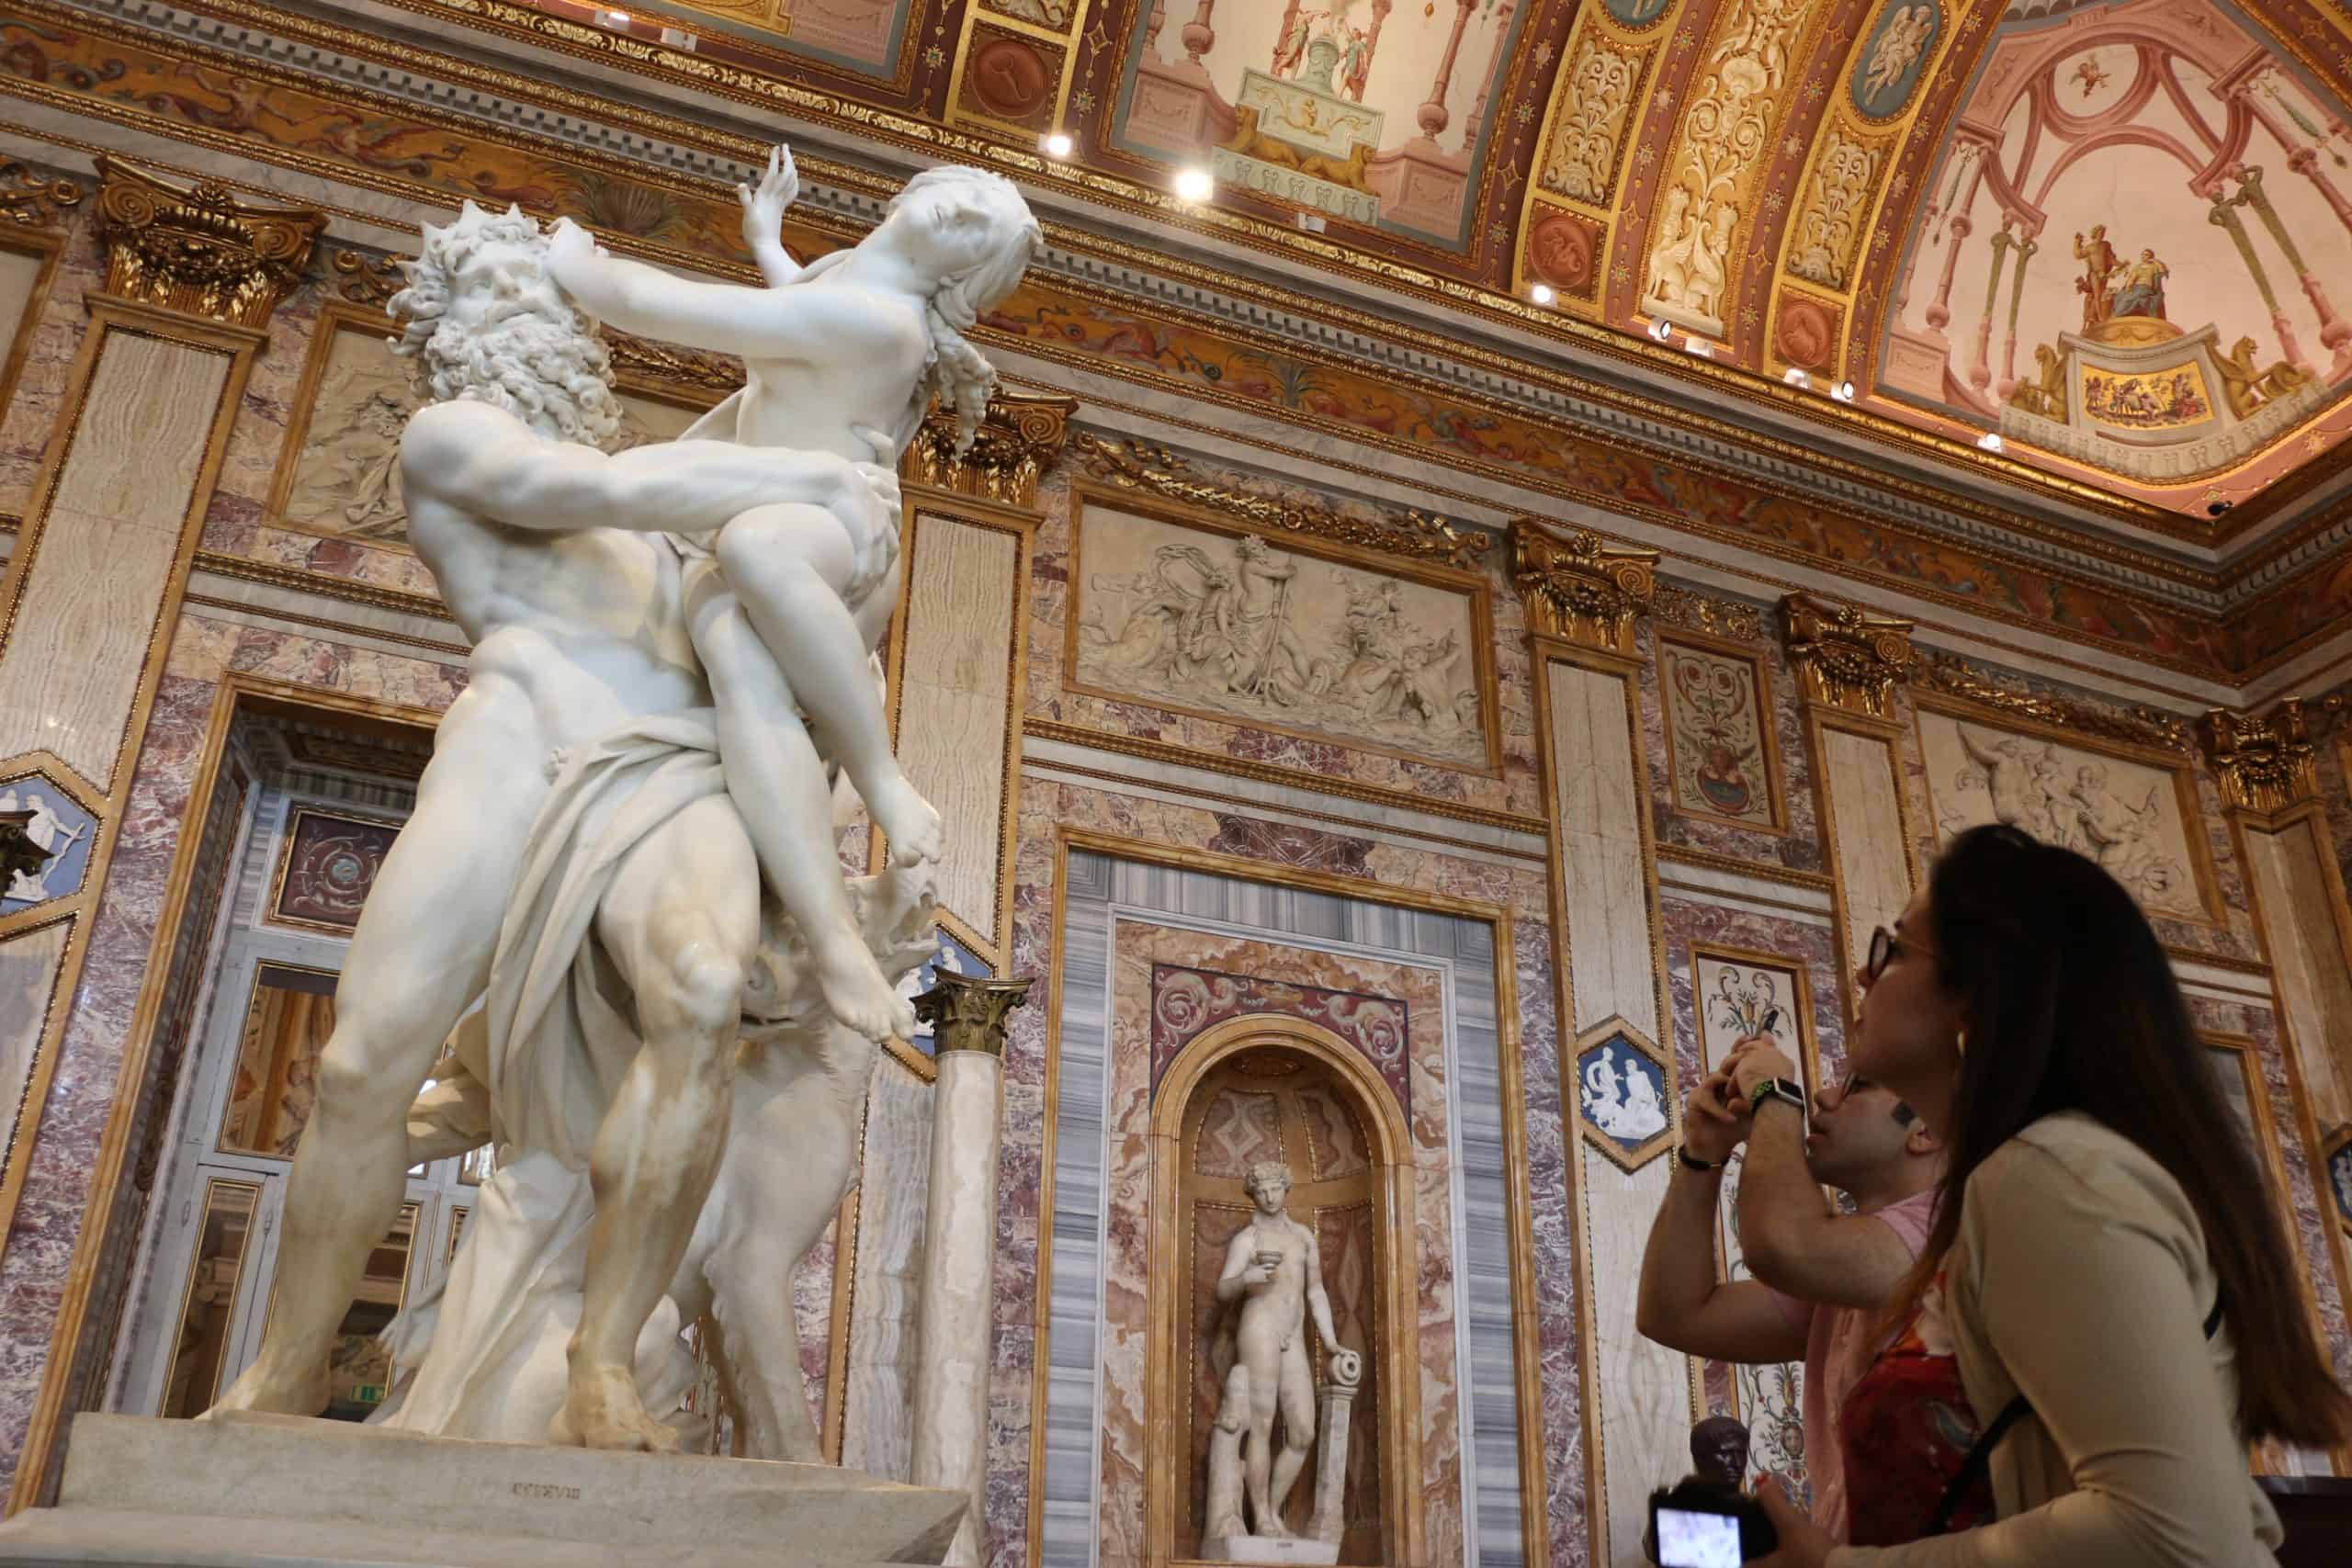 The Rape of Proserpina by Bernini  - things to see in the Borghese Gallery